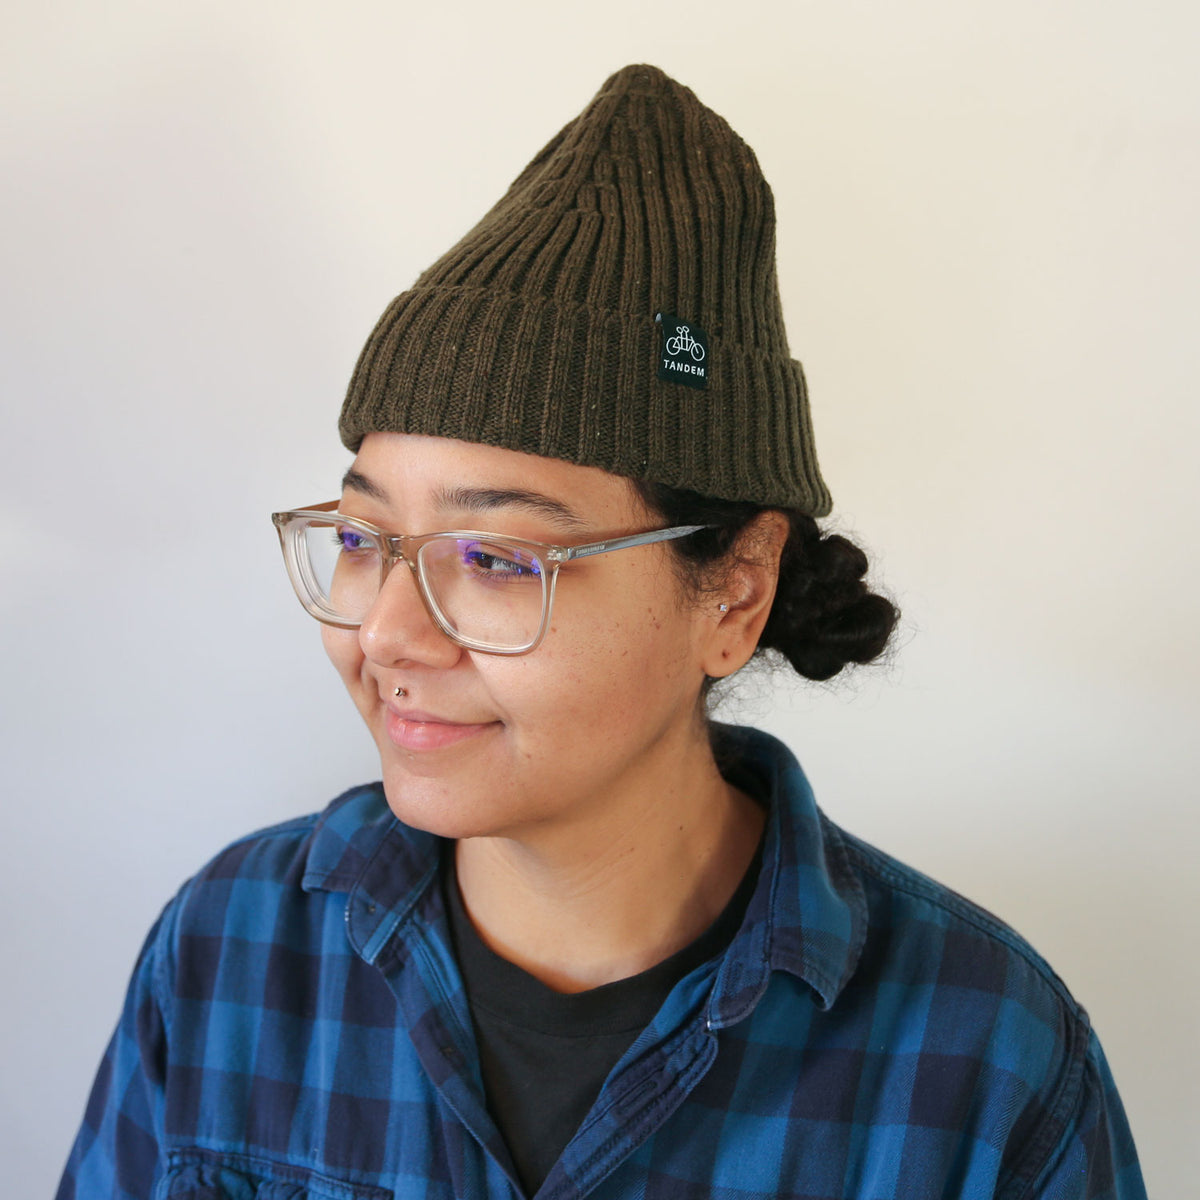 A person with light brown skin and glasses wearing a dark green Tandem Coffee Roasters merino wool beanie and a blue plaid shirt, smiling slightly and looking to the side against a light background.